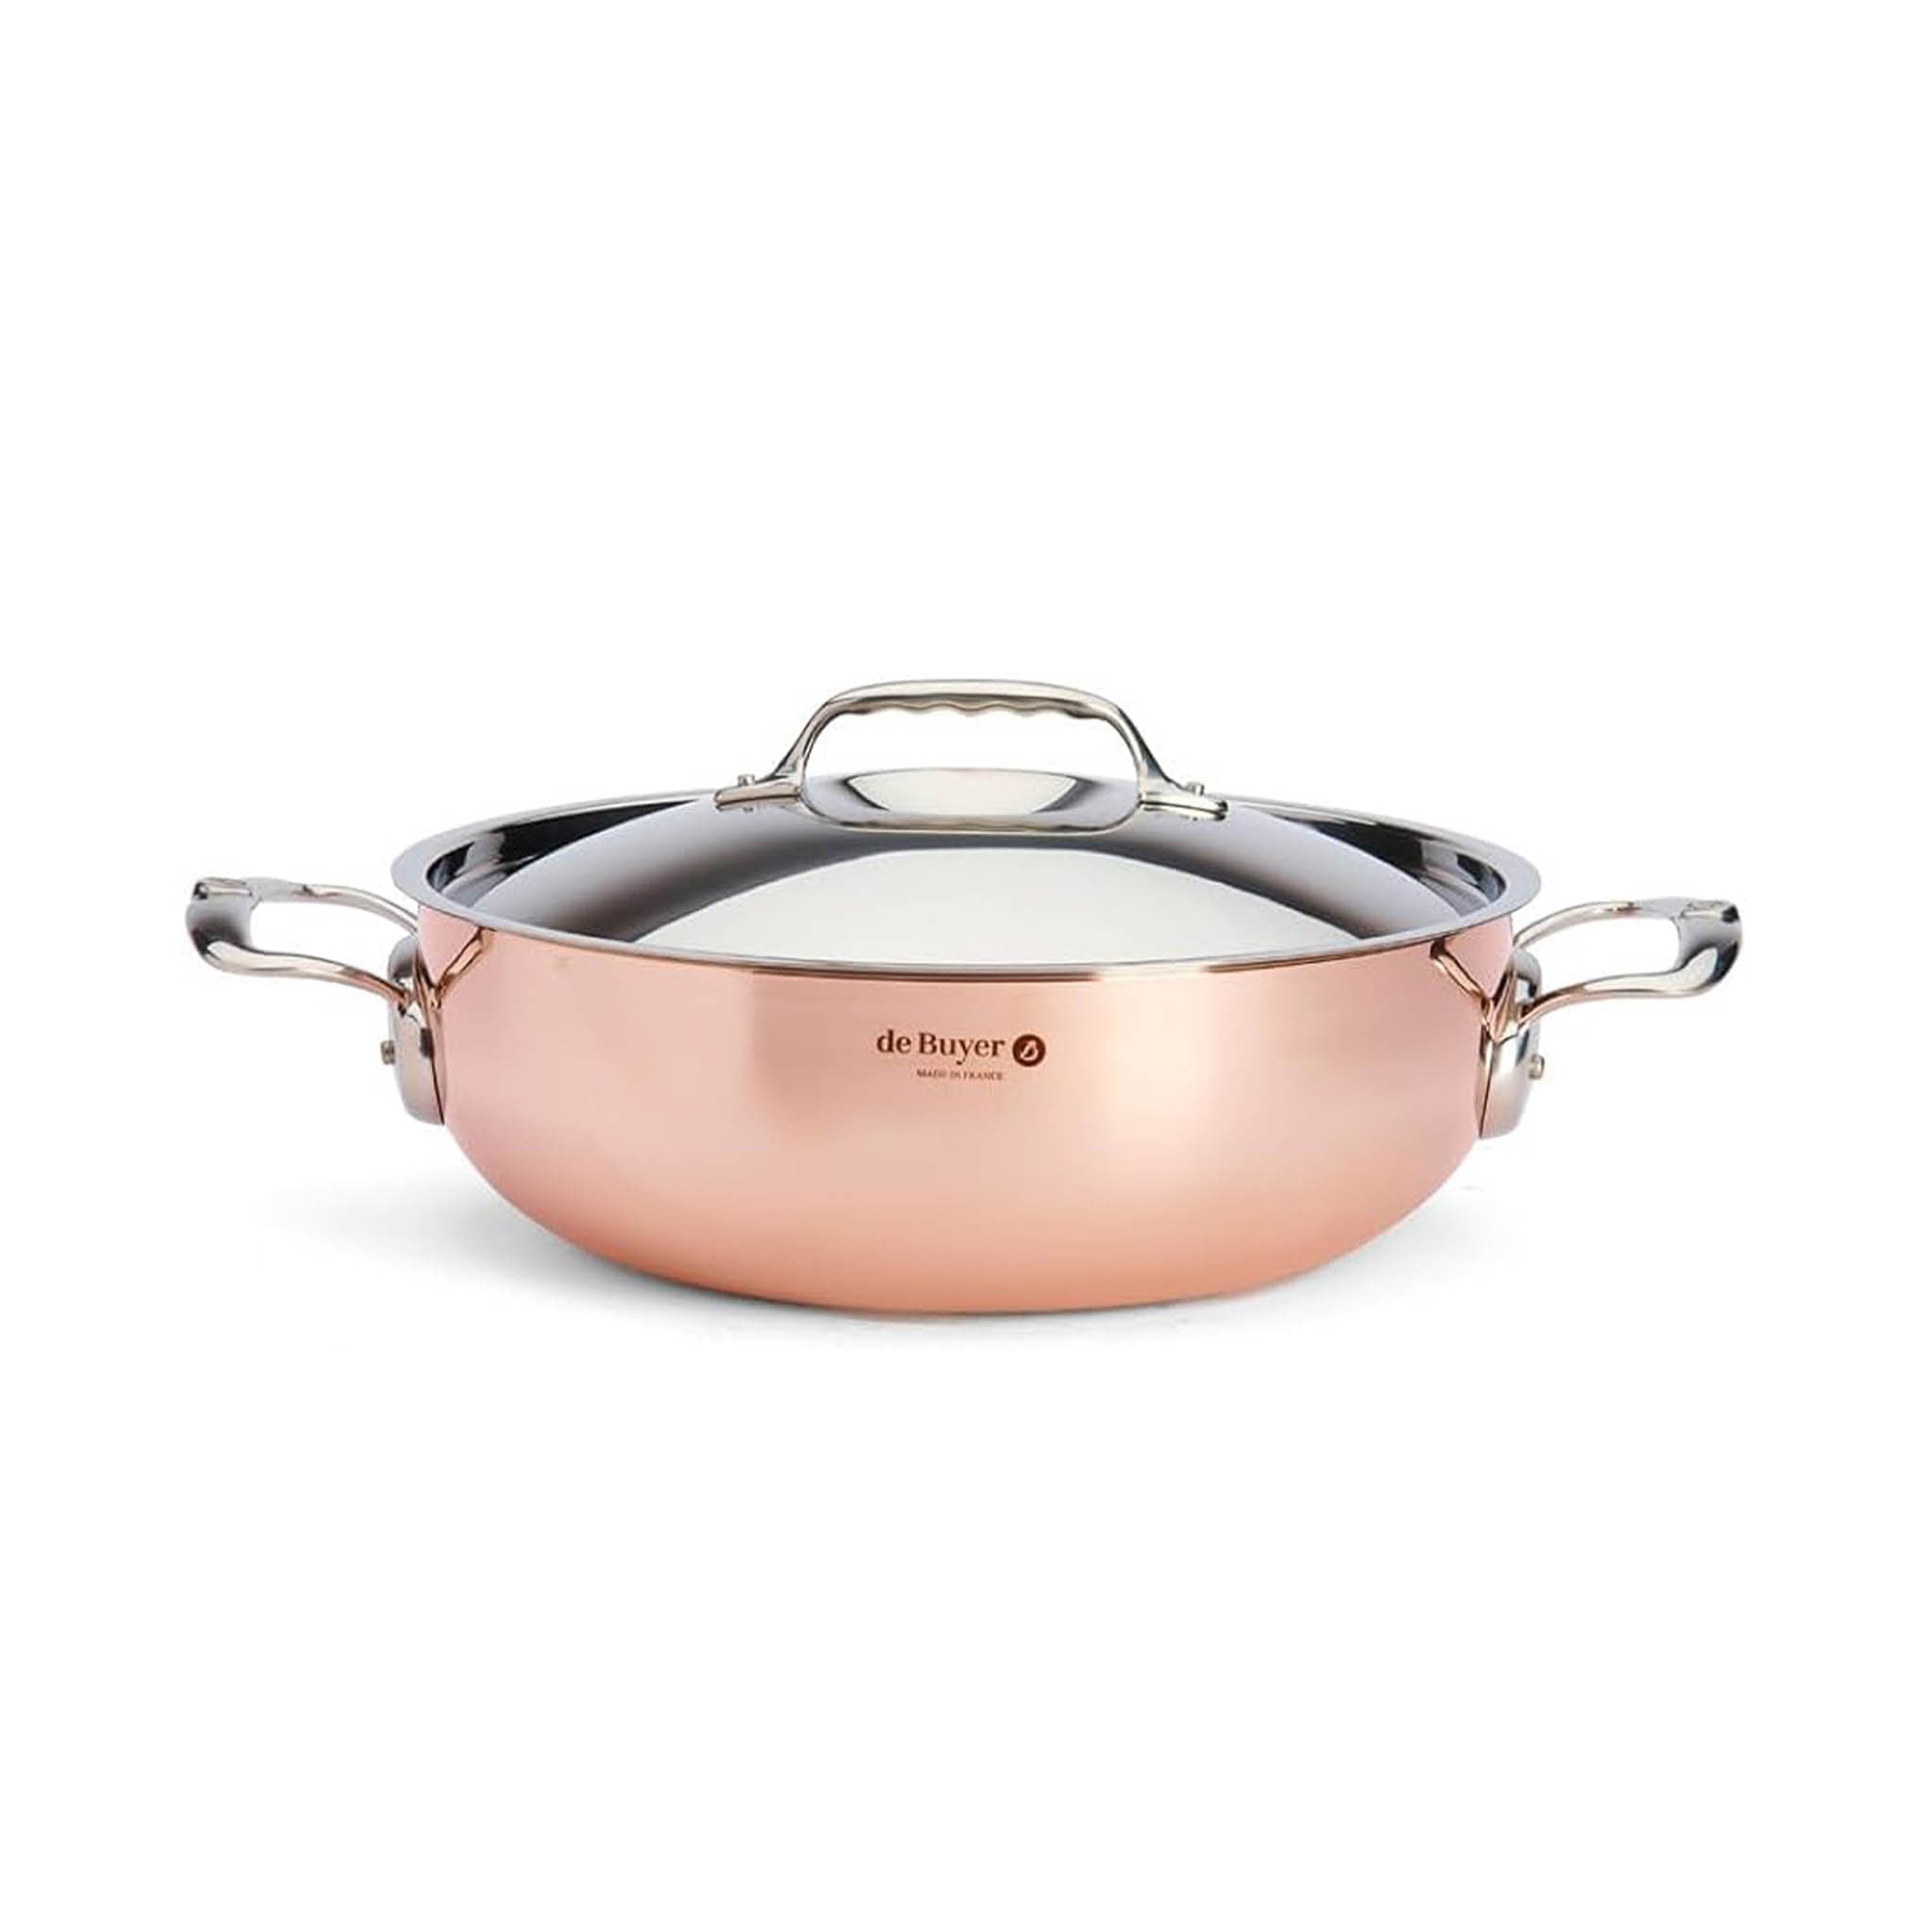 De Buyer Prima Matera Copper Curved Saute Pan with Lid & Stainless Steel Handle, 28cm